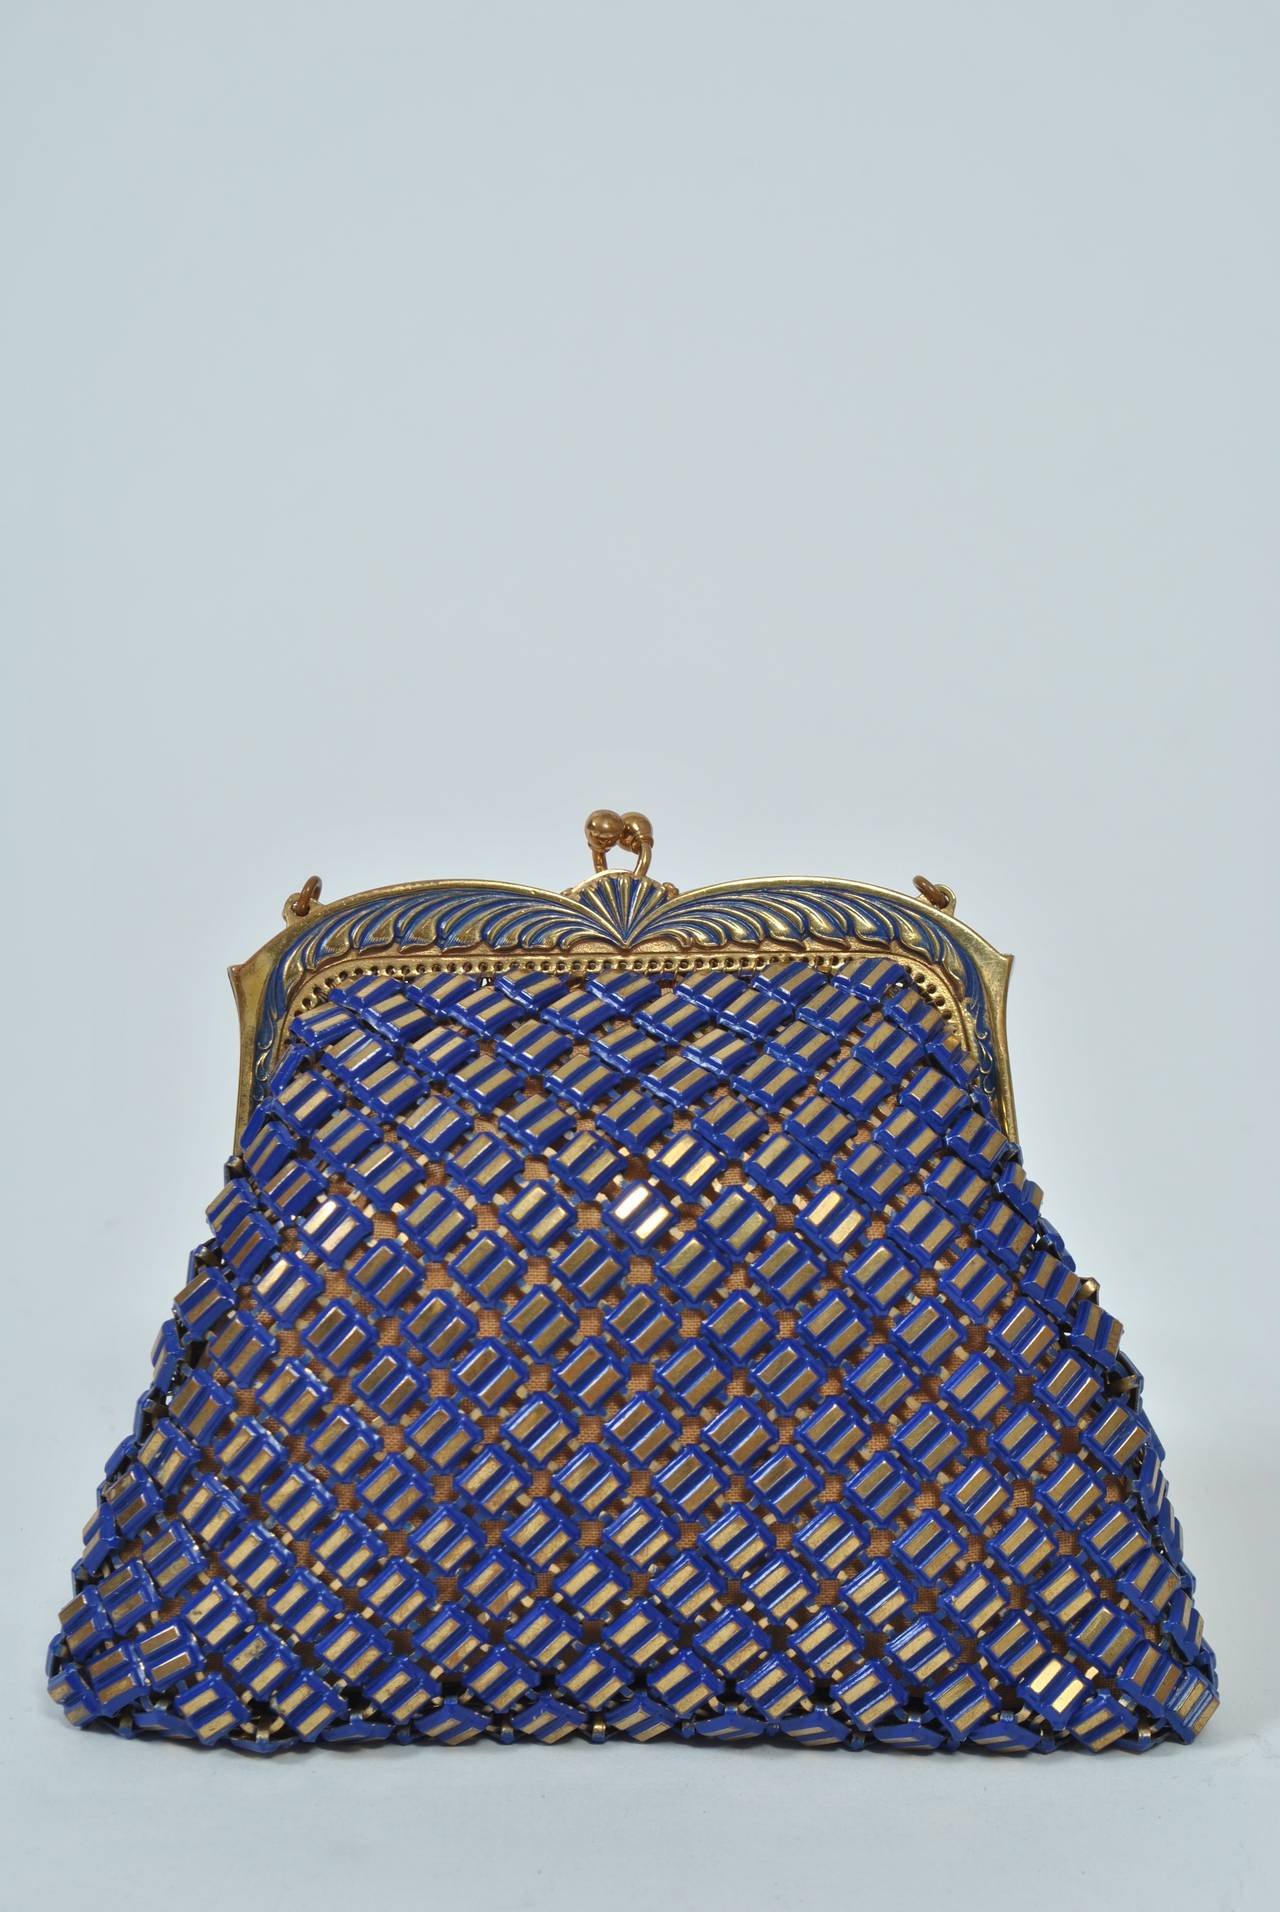 This is an unusual version of the iconic Whiting & Davis mesh bag composed of double-bar links in gold outlined with vibrant blue enamel, which also accents the scrolled gold frame. Kiss lock, beige taffeta lining, all in excellent condition. Narrow